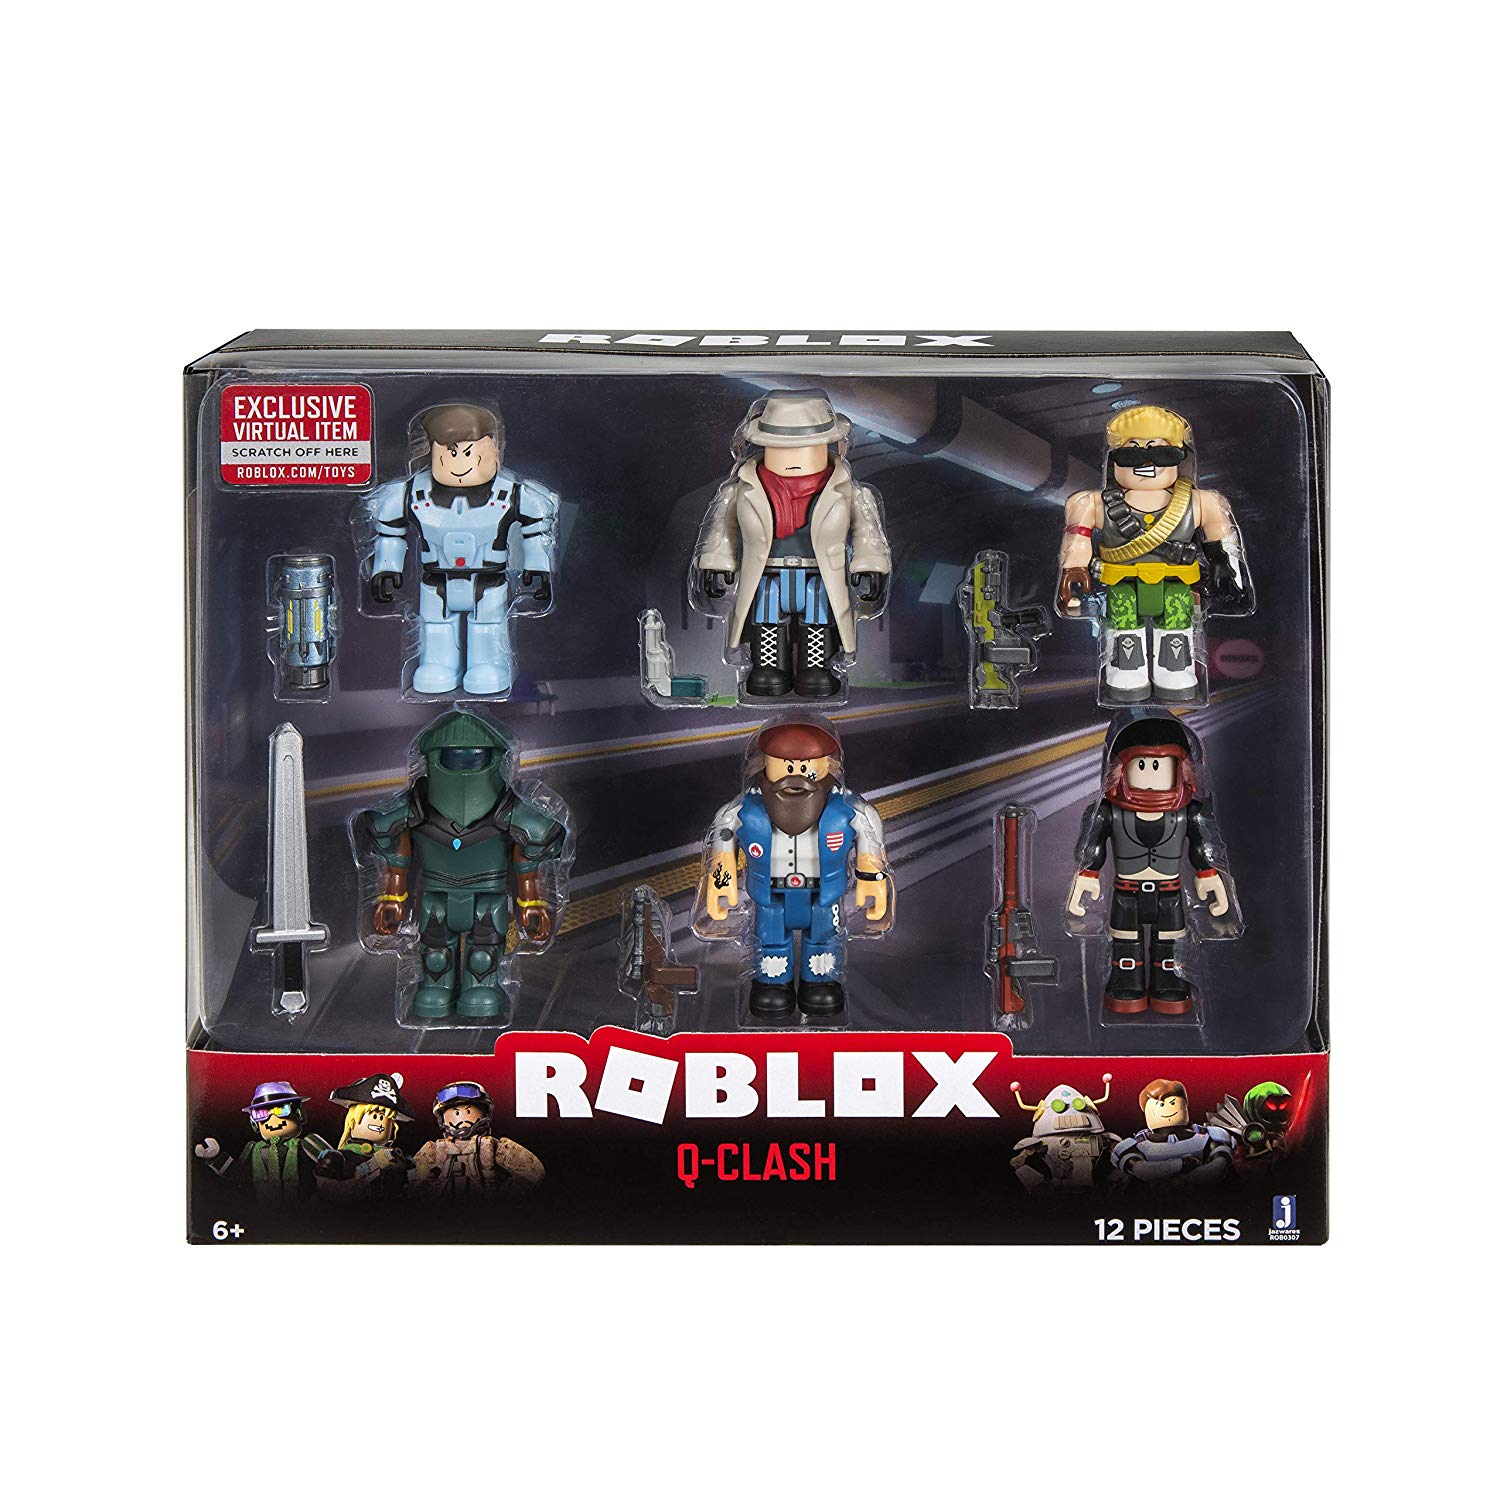 Buy Roblox Top Products Online Lazada Sg - buy roblox top products online lazadasg